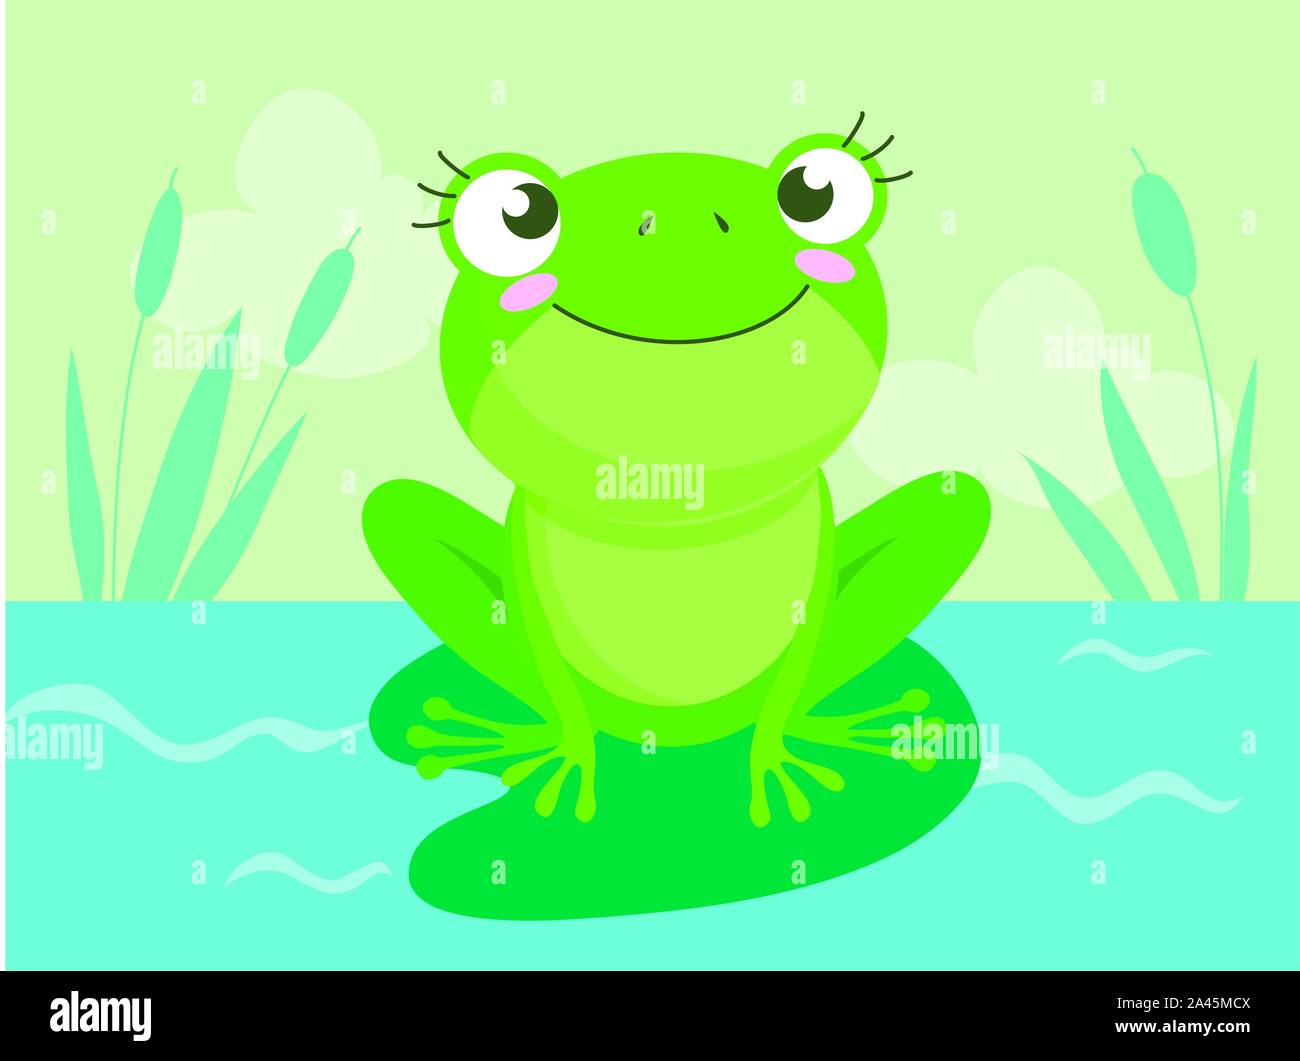 Cartoon Vector of Green cute baby frog isolated on white background. Stock Vector